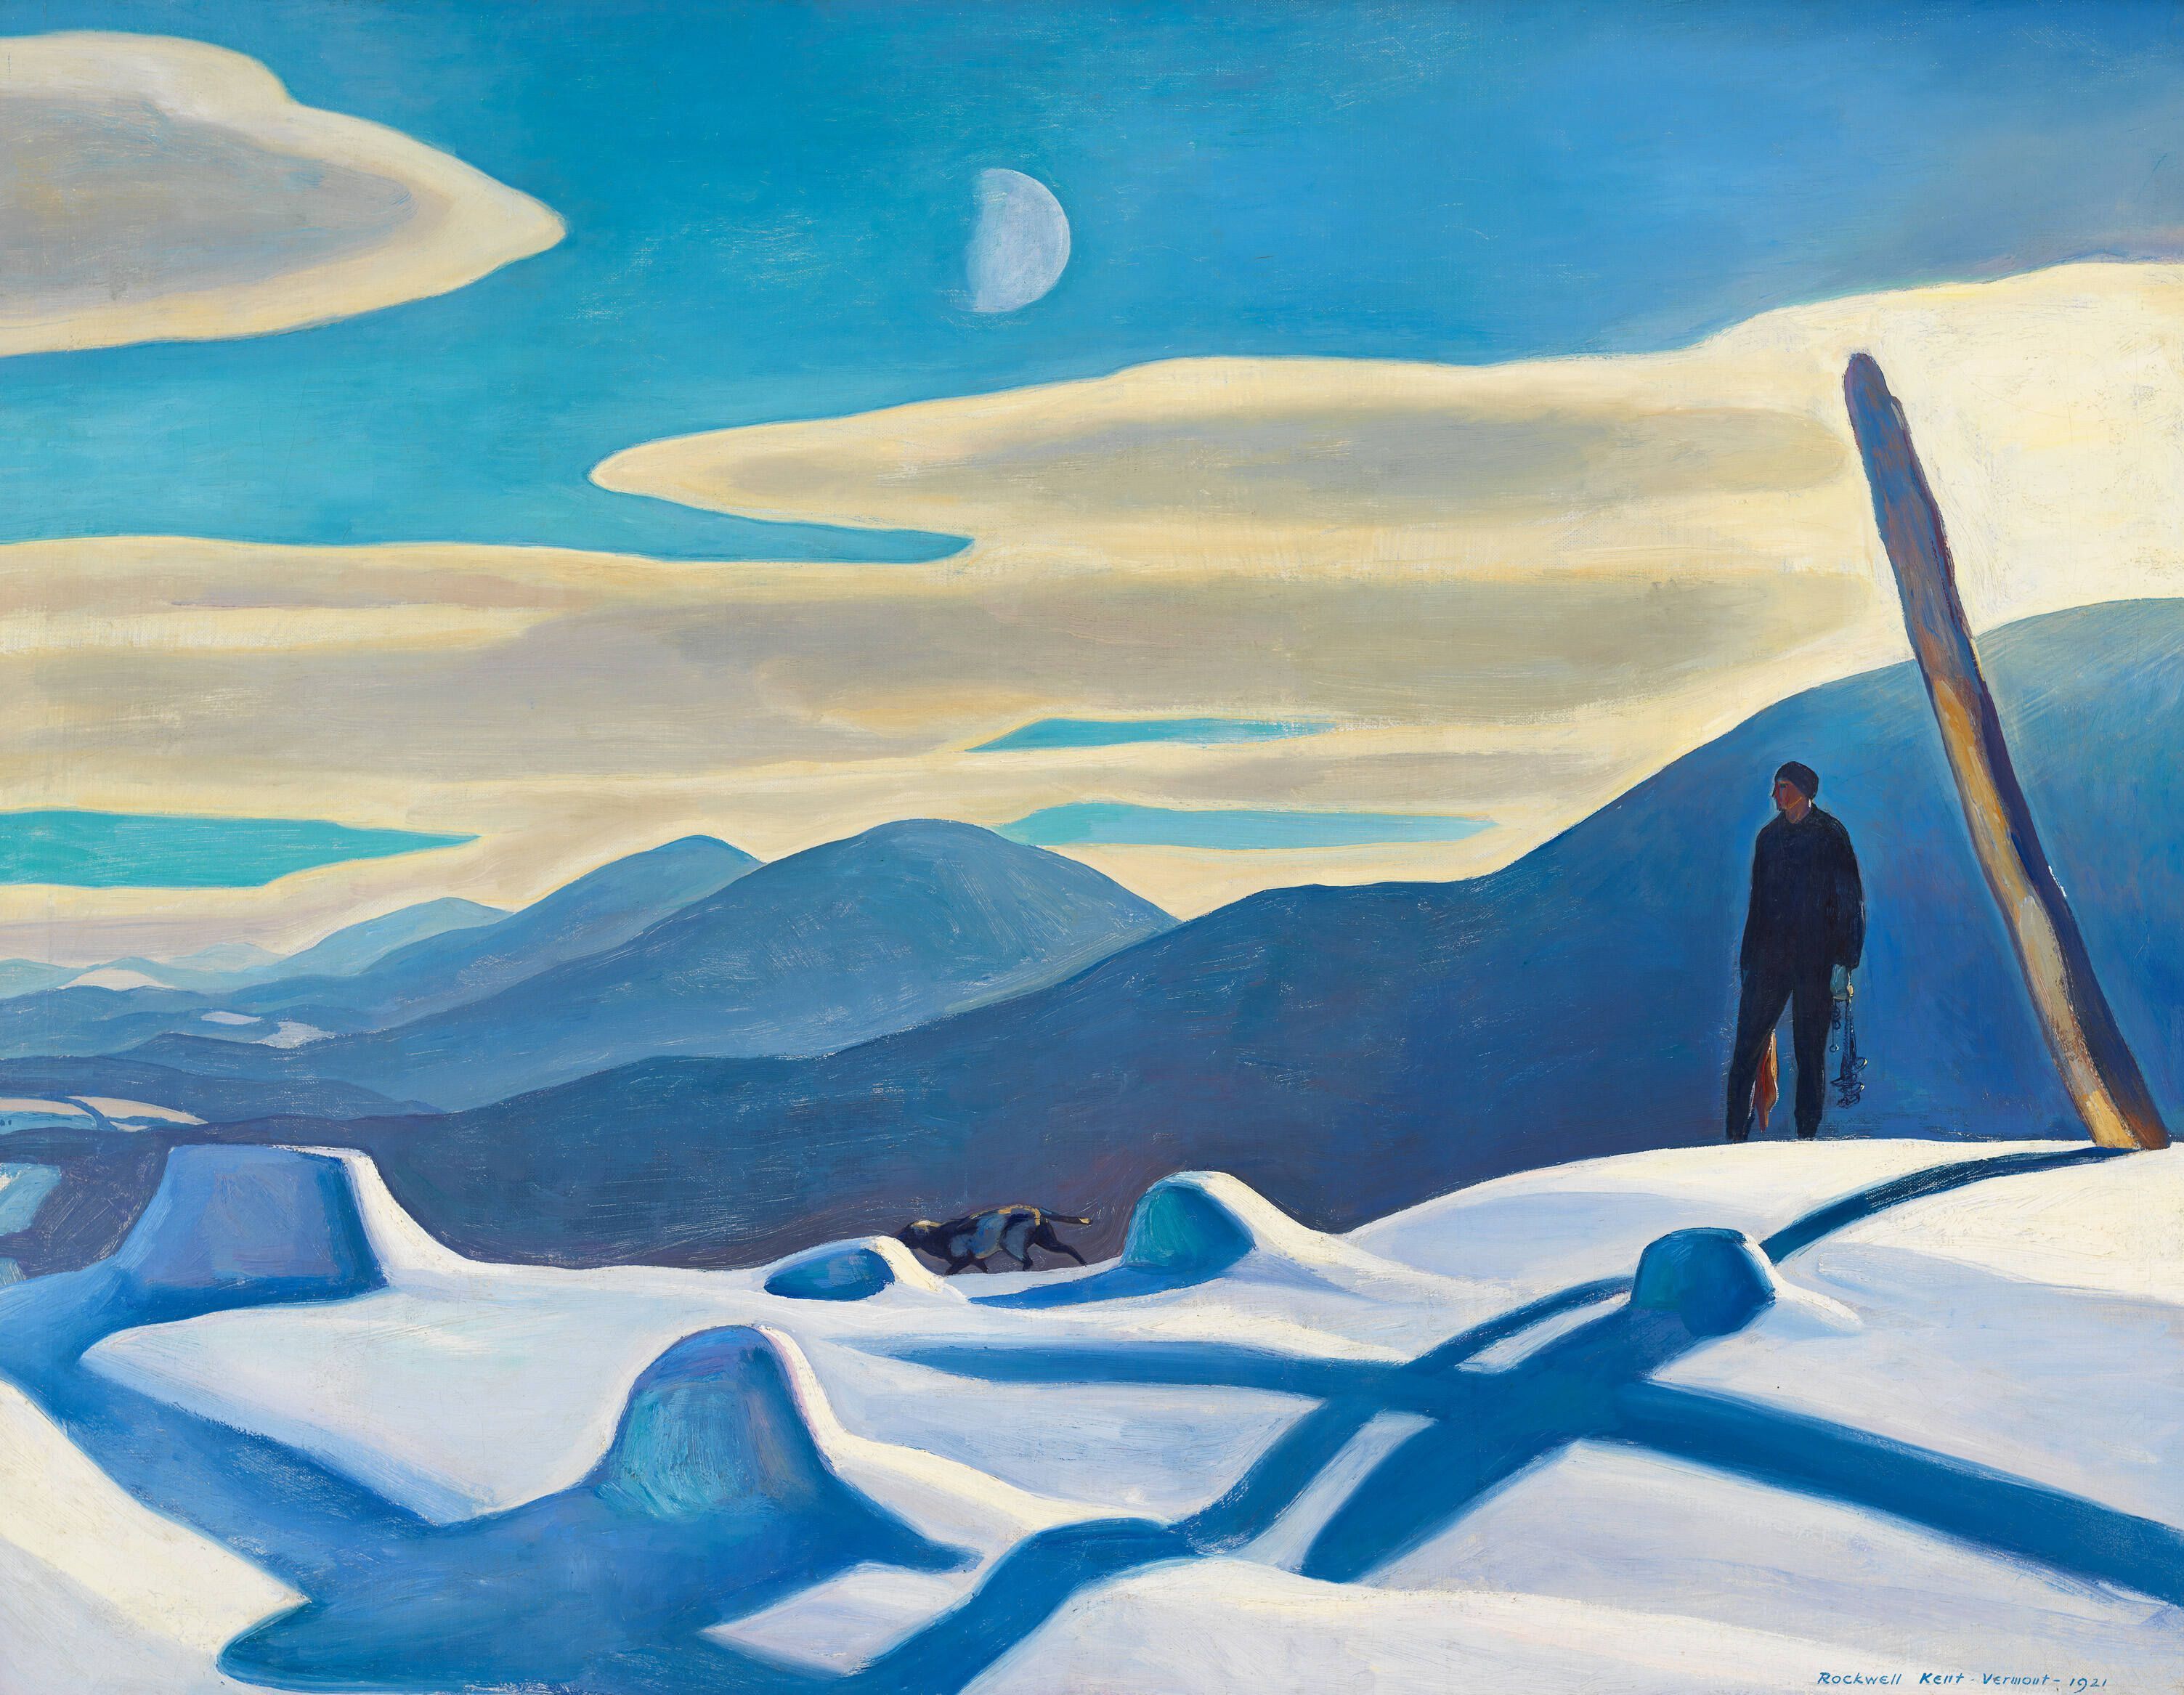 Painting - The Trapper by Rockwell Kent (1921)